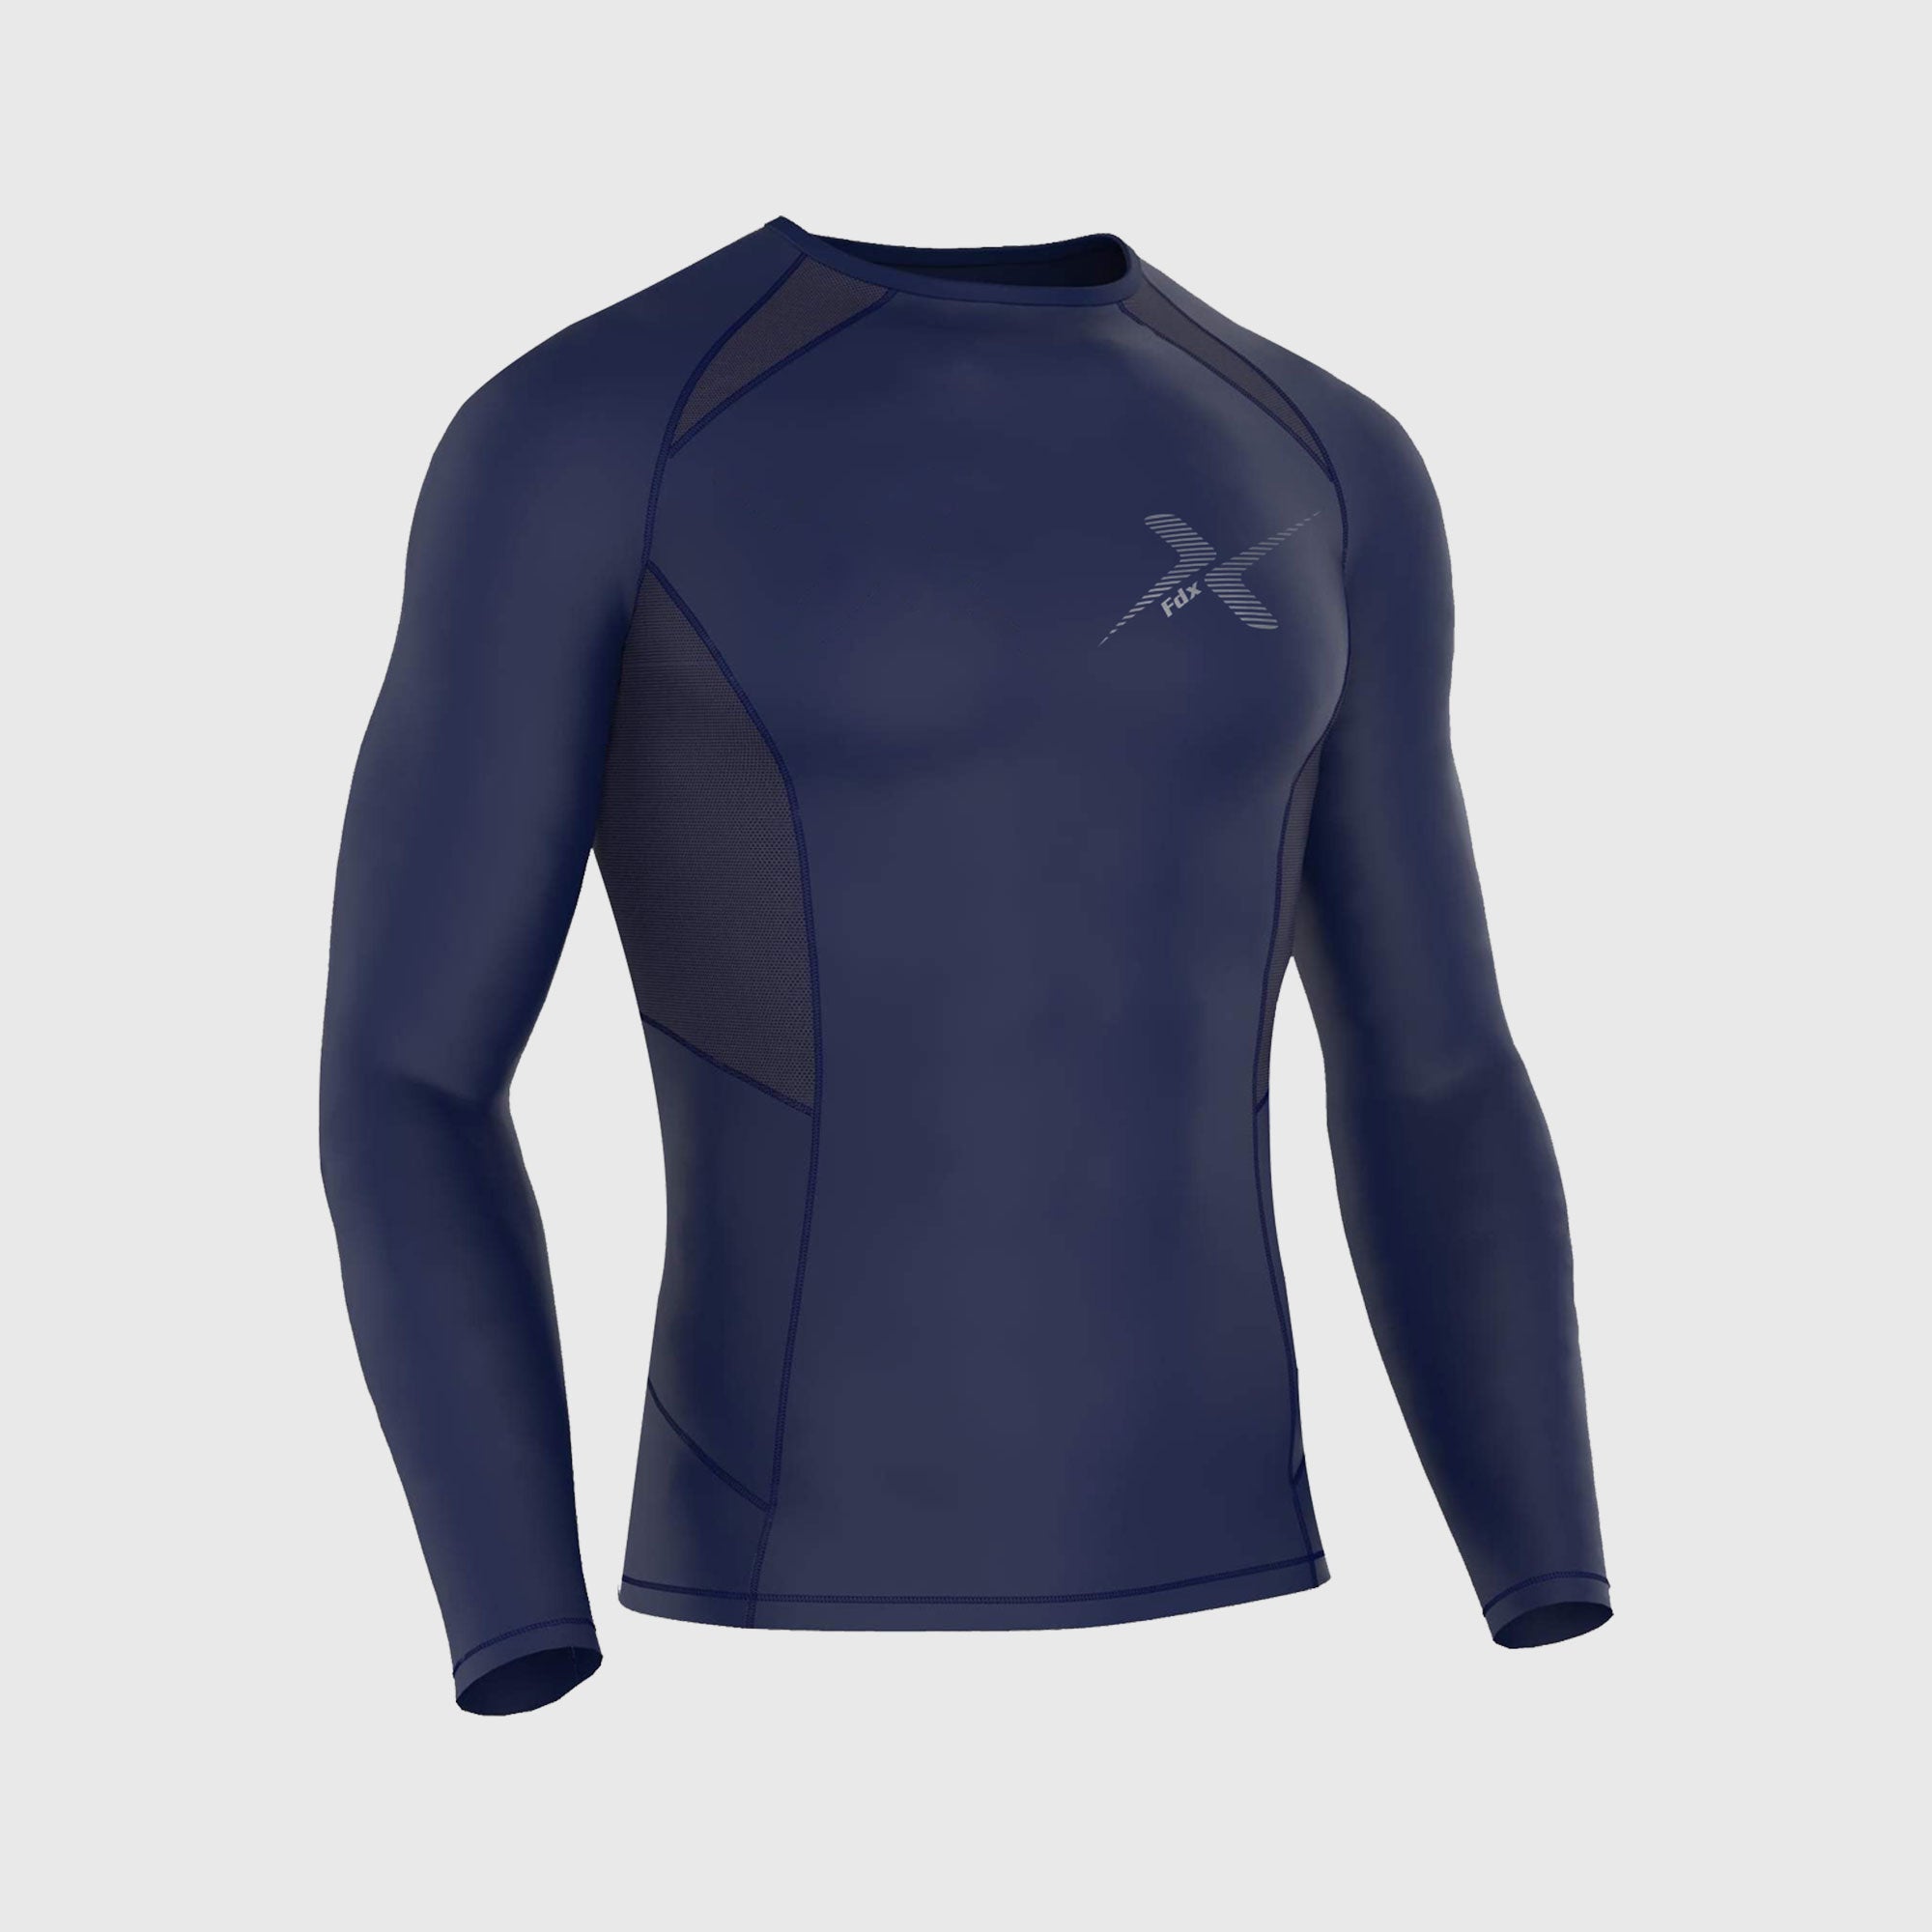 Fdx Best Men's Navy Blue Long Sleeve Compression Top Running Gym Workout Wear Rash Guard Stretchable Breathable - Recoil